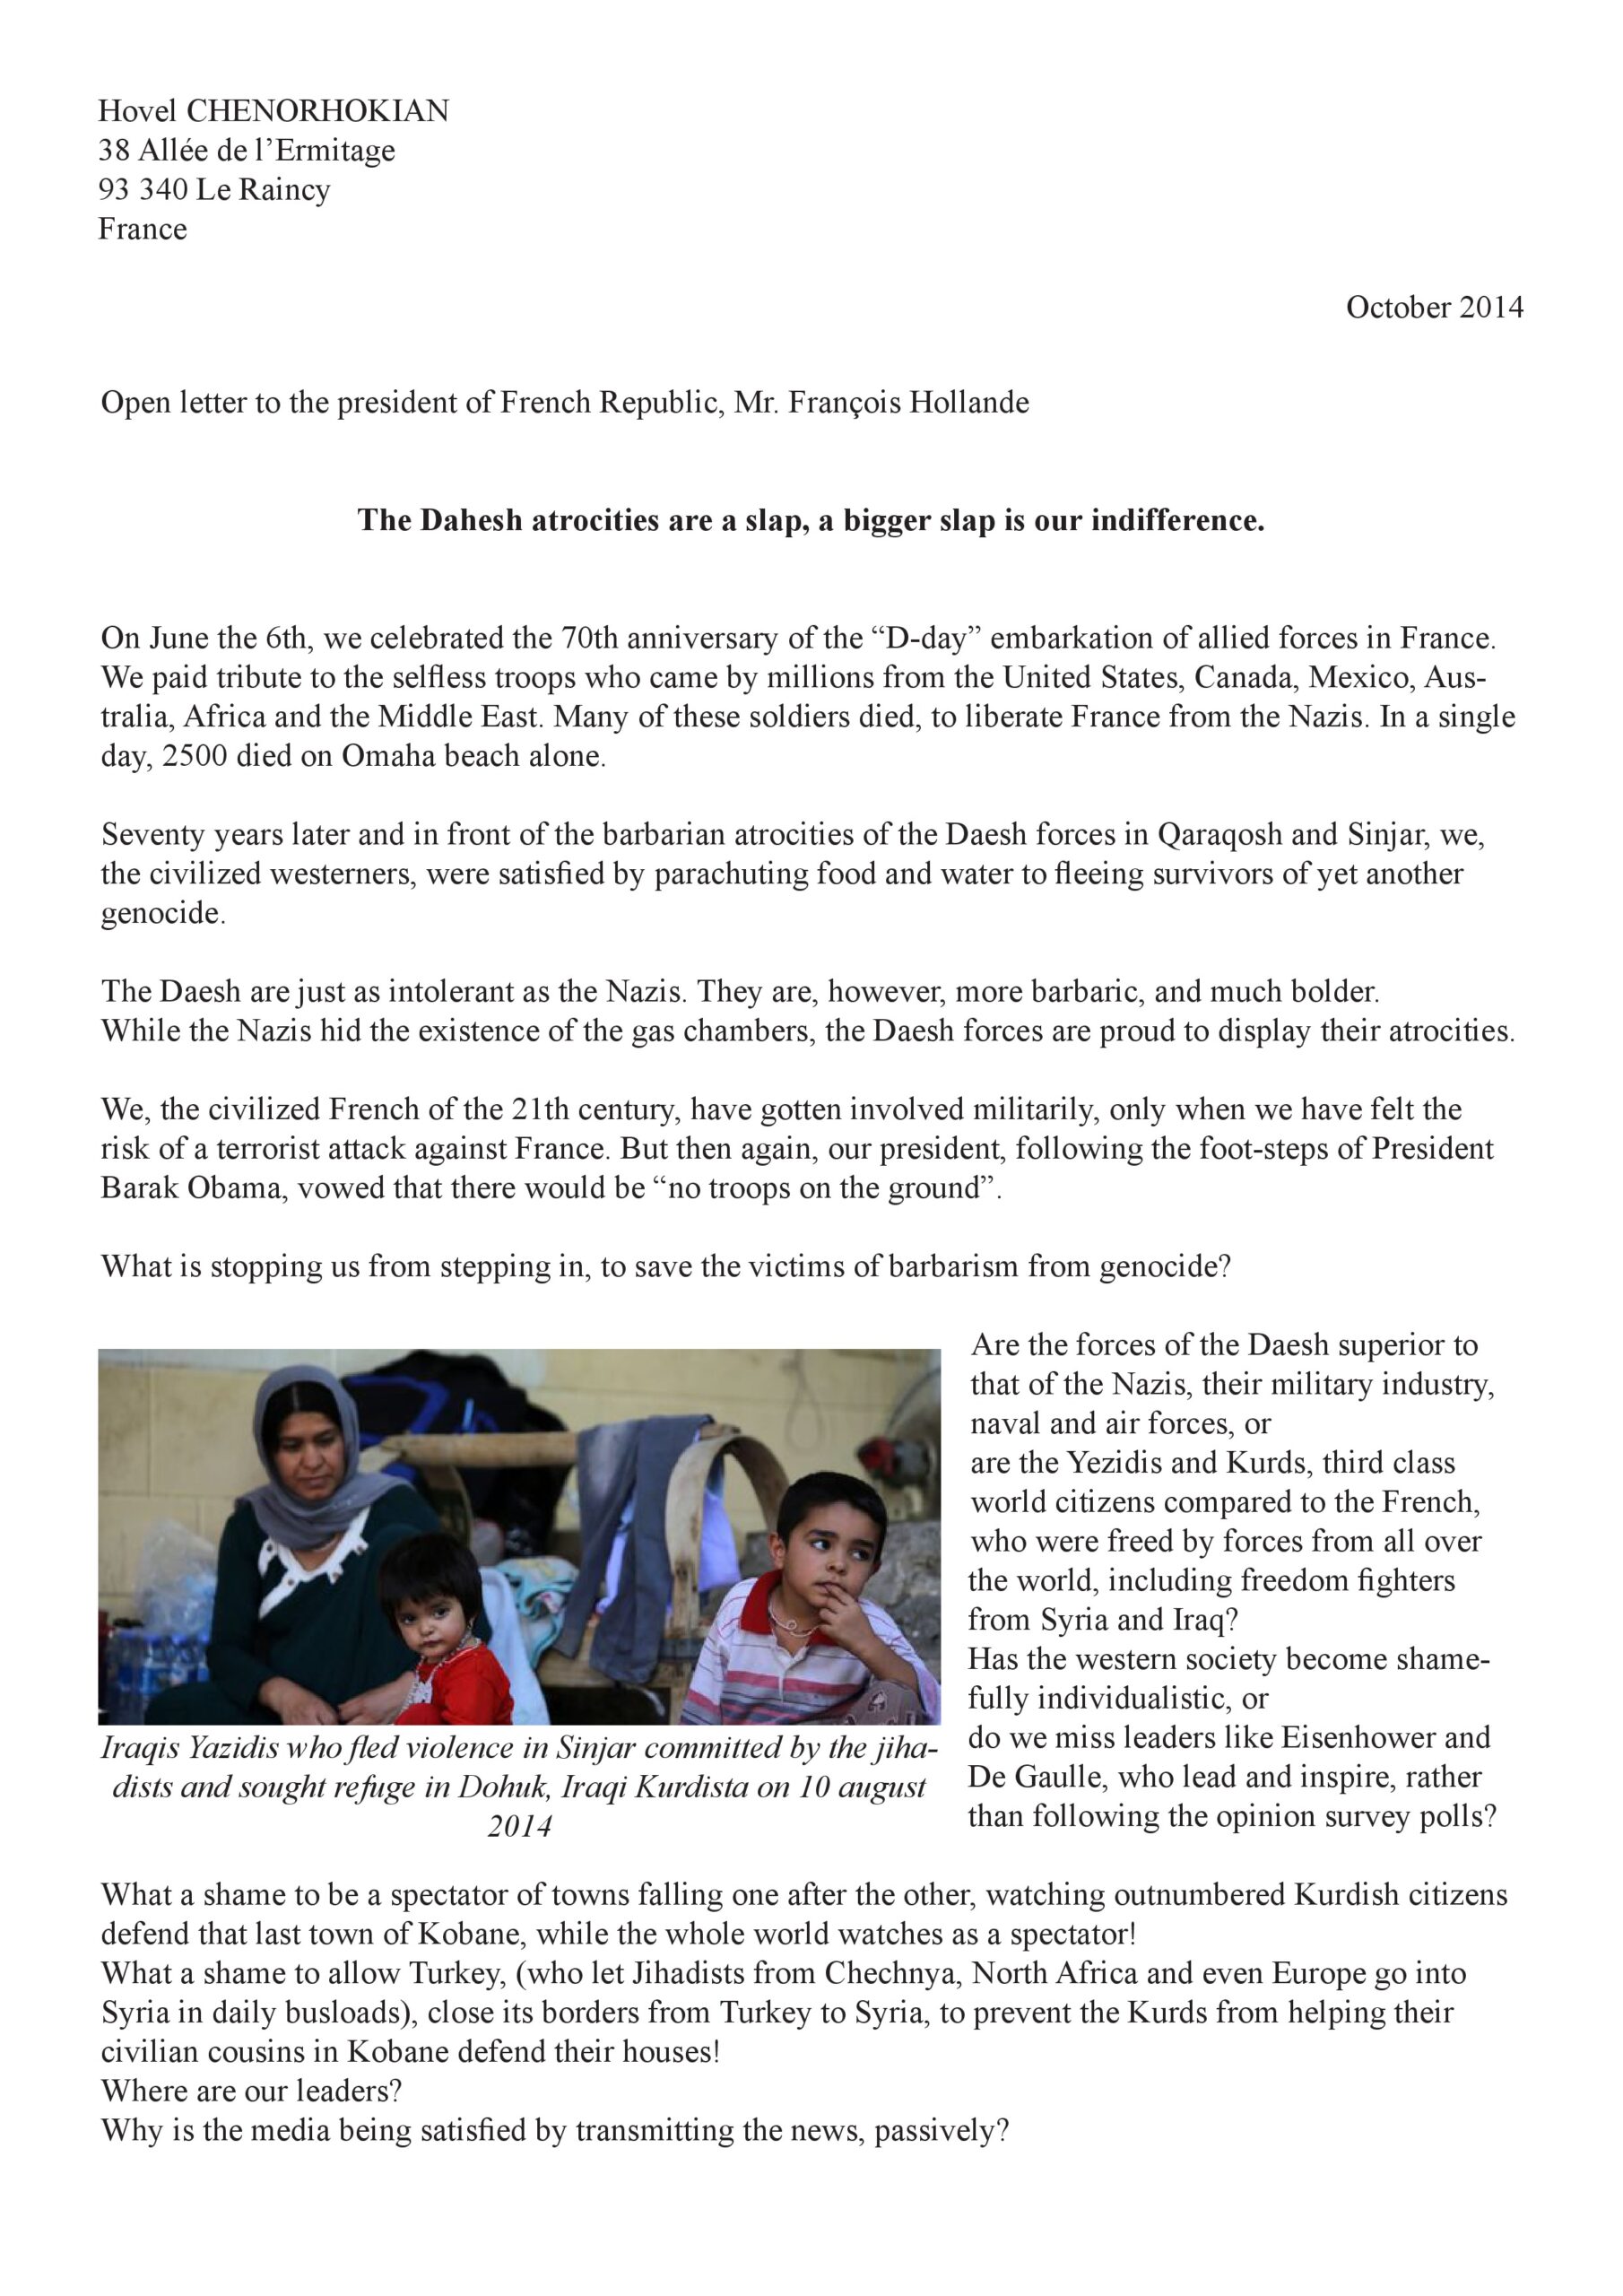 Open letter to president Hollande-page-0